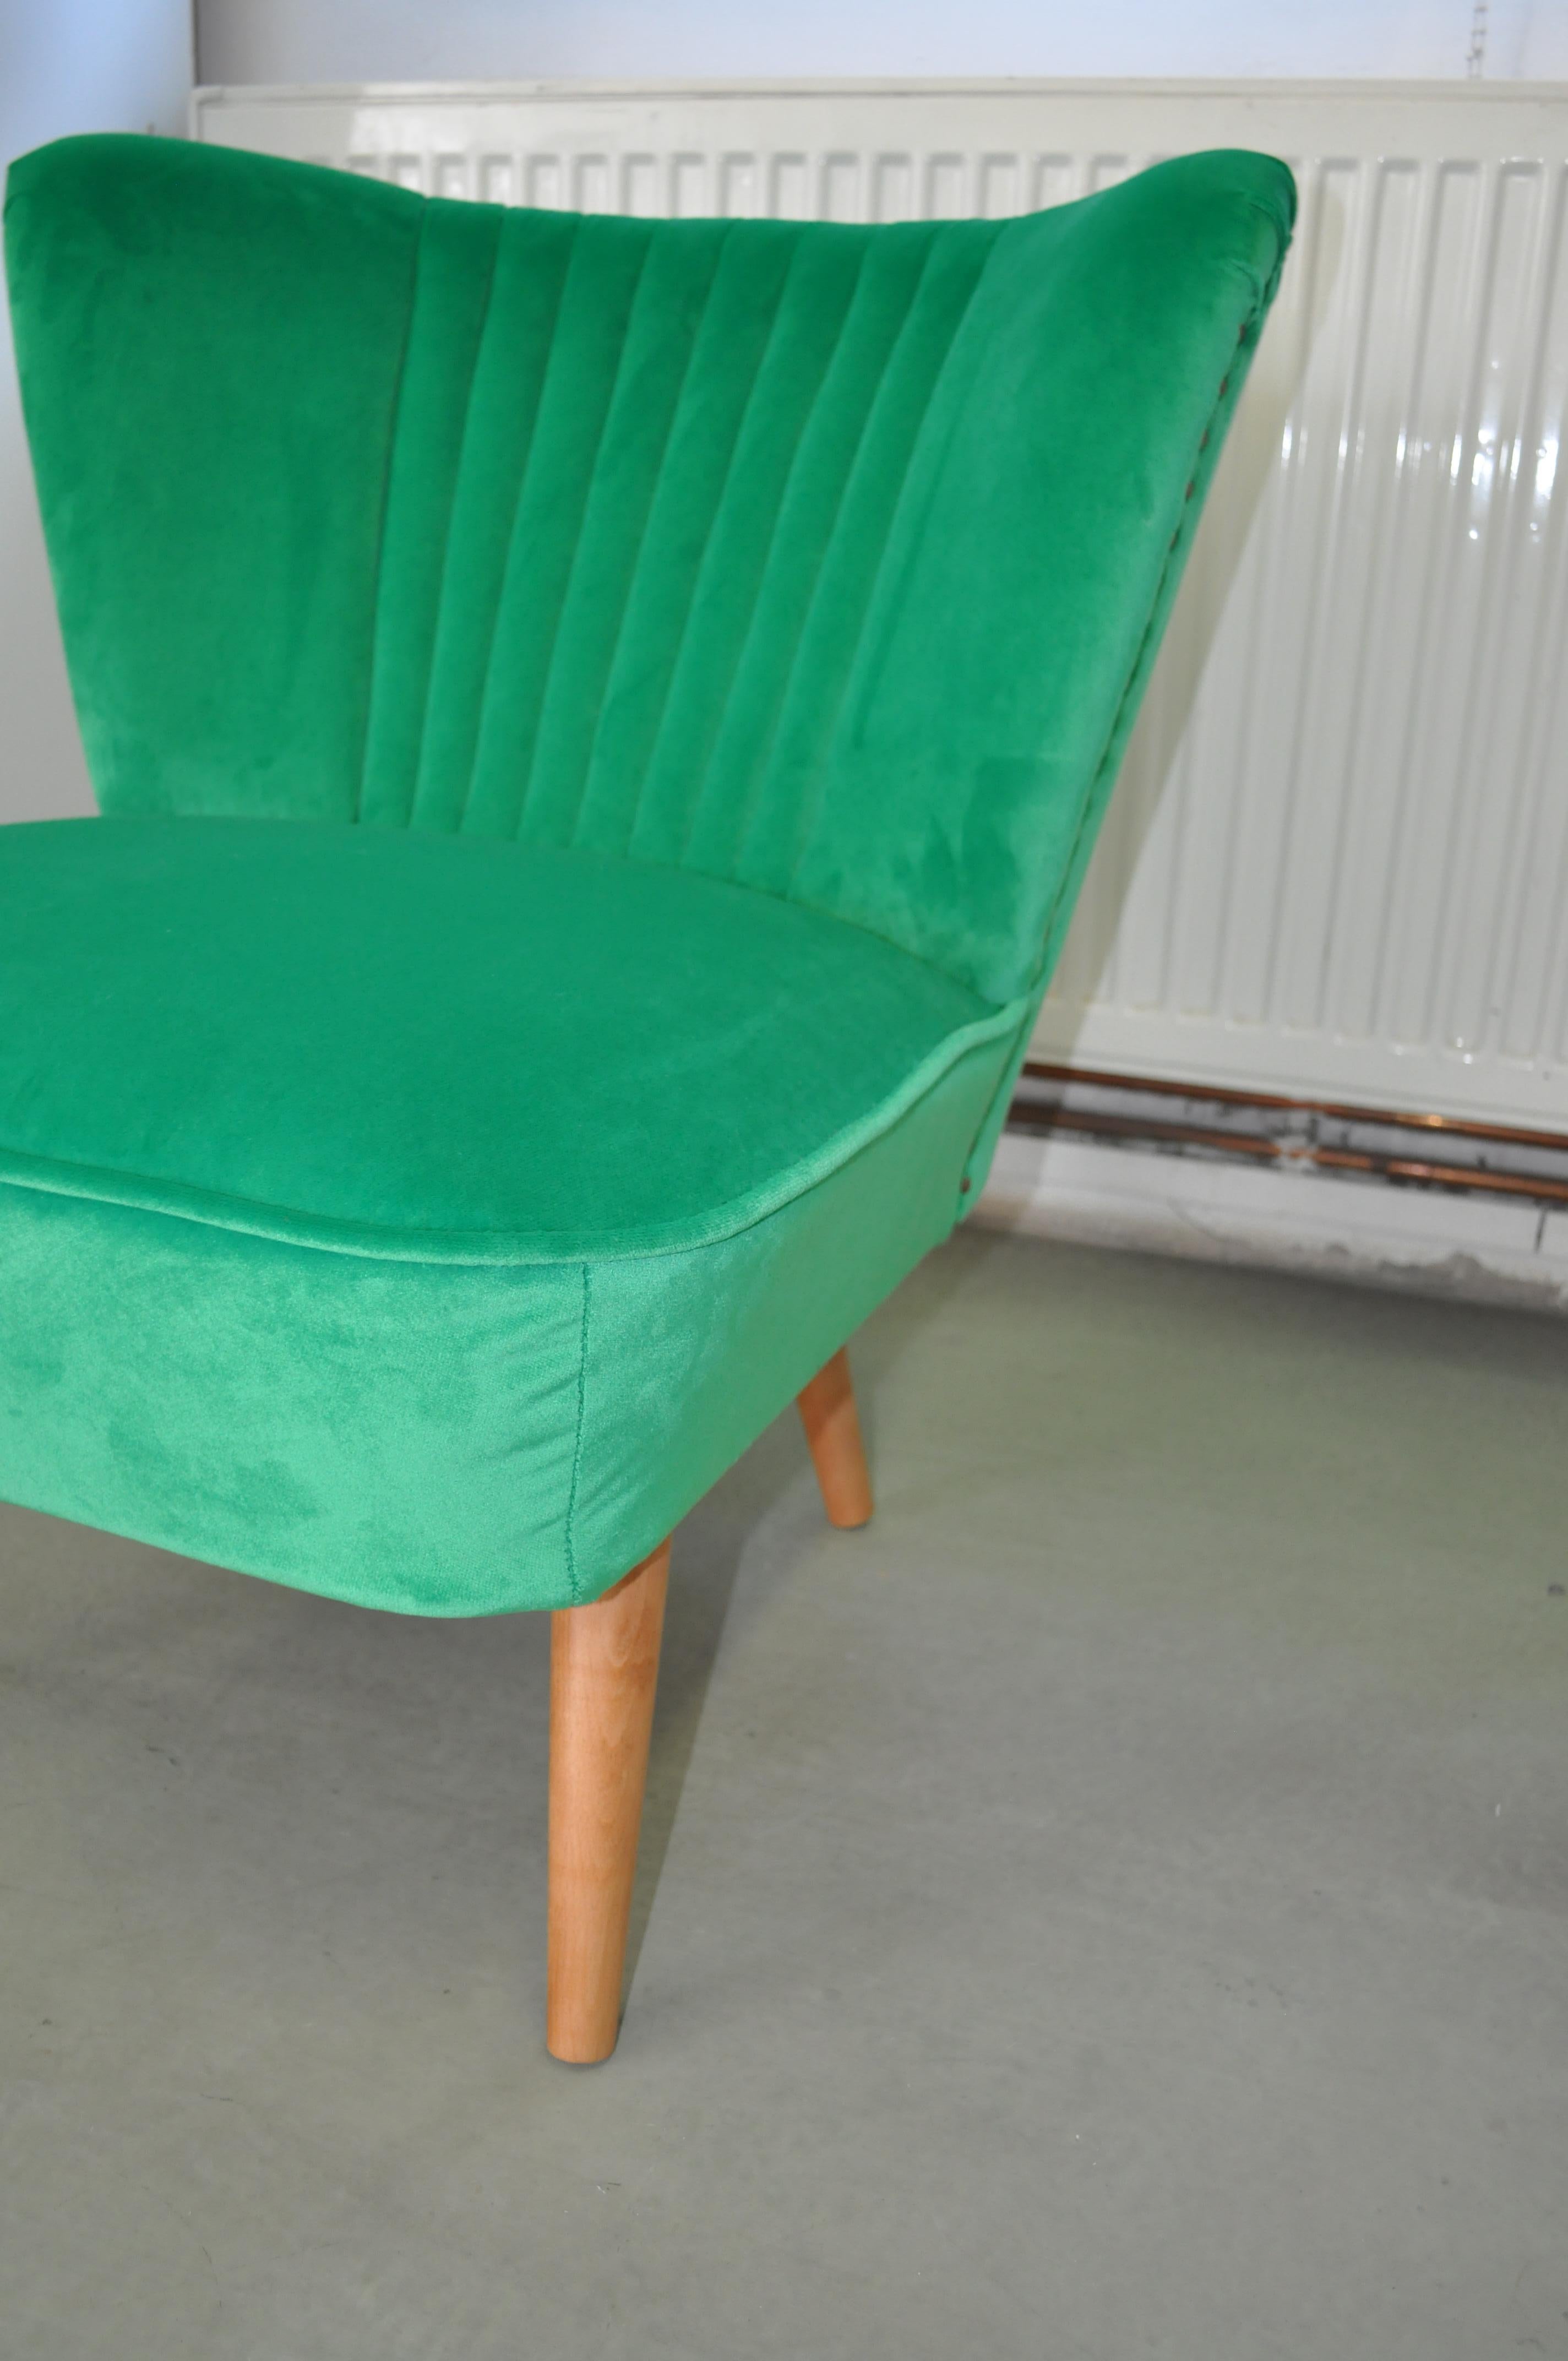 1950s shell back cocktail chair recovered with a green fabric. Very well constructed, extremely comfortable.
The chair fully re-upholstered with a green colored fabric.
This club chair was manufactured in Budapest, Hungary.